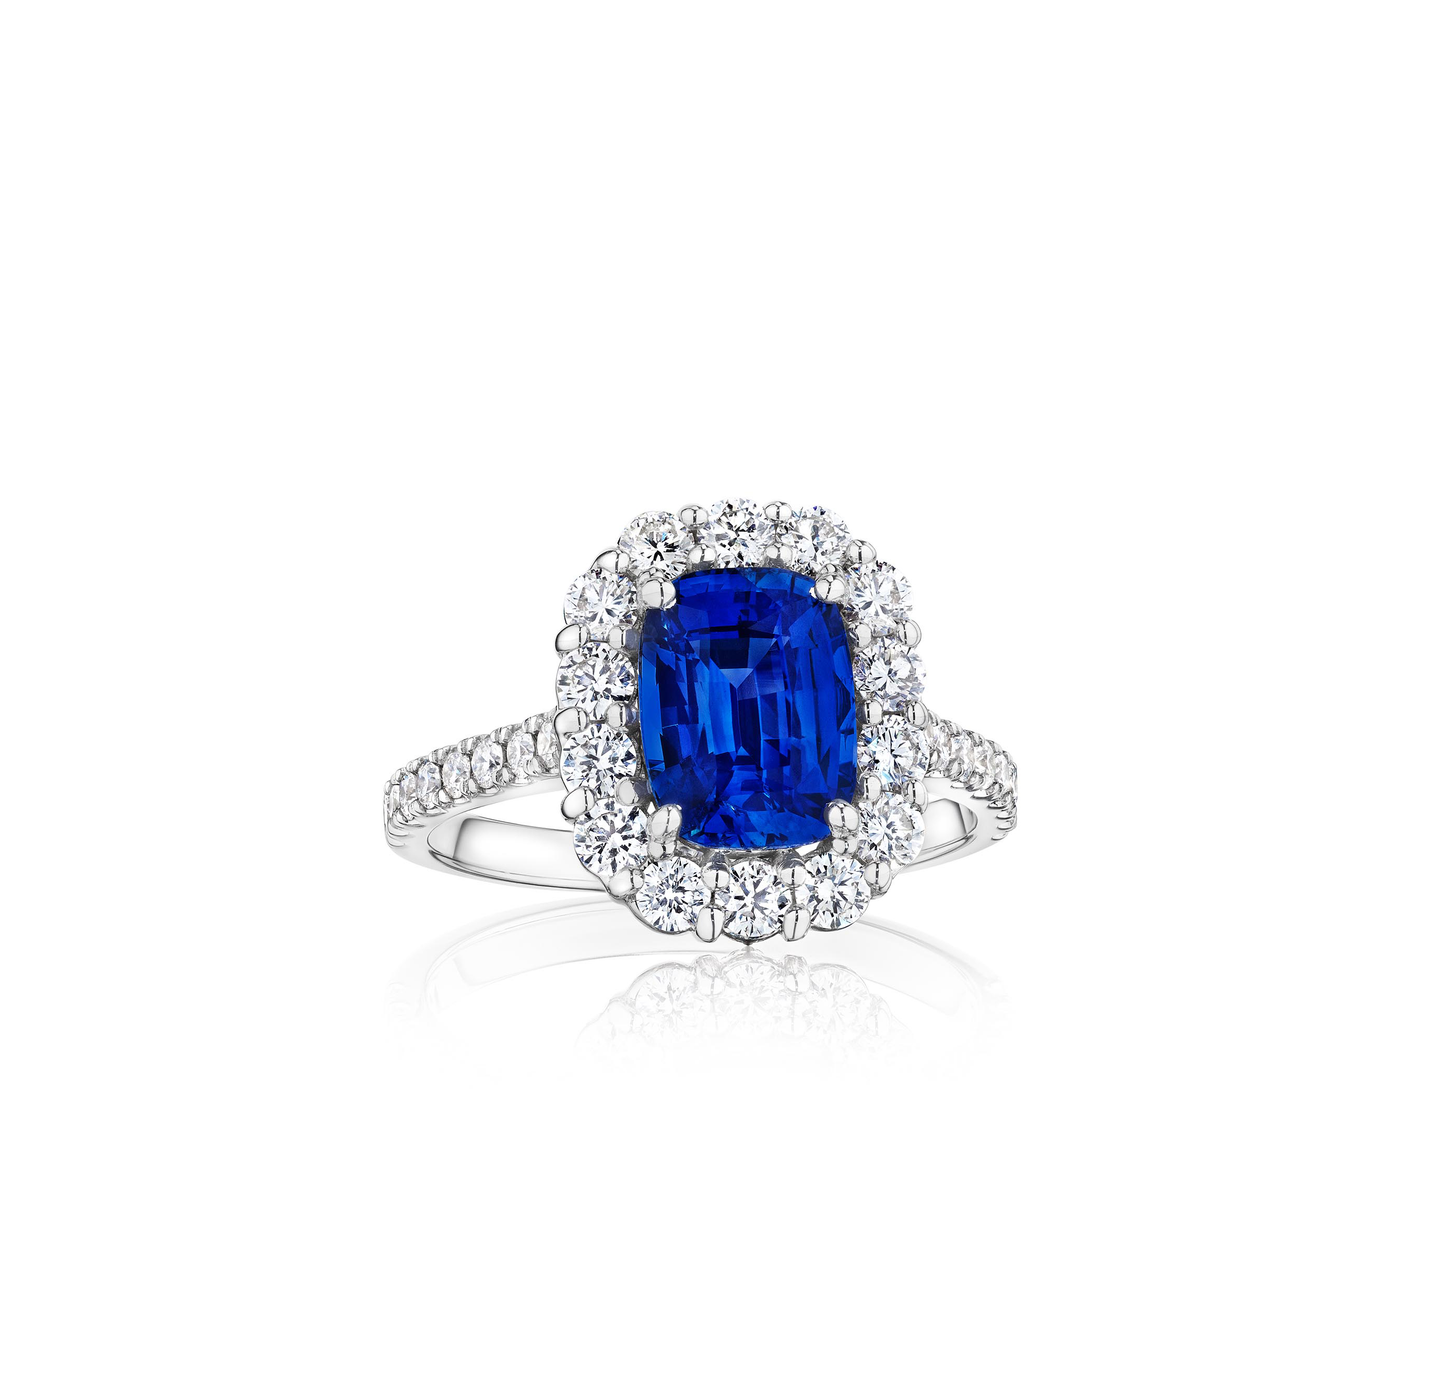 Sabel Collection White Gold Cushion Sapphire and Diamond Ring